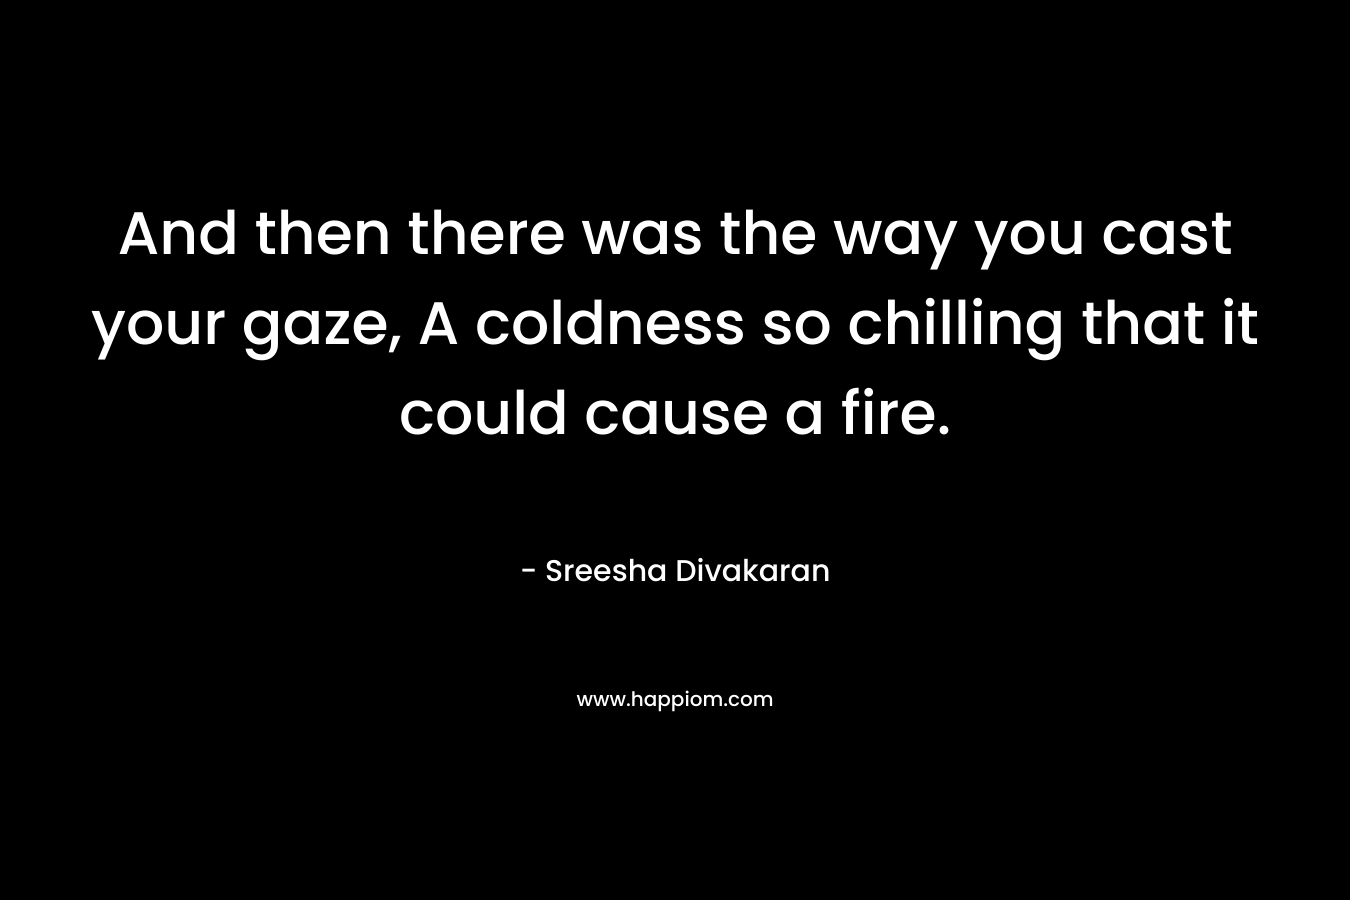 And then there was the way you cast your gaze, A coldness so chilling that it could cause a fire. – Sreesha Divakaran